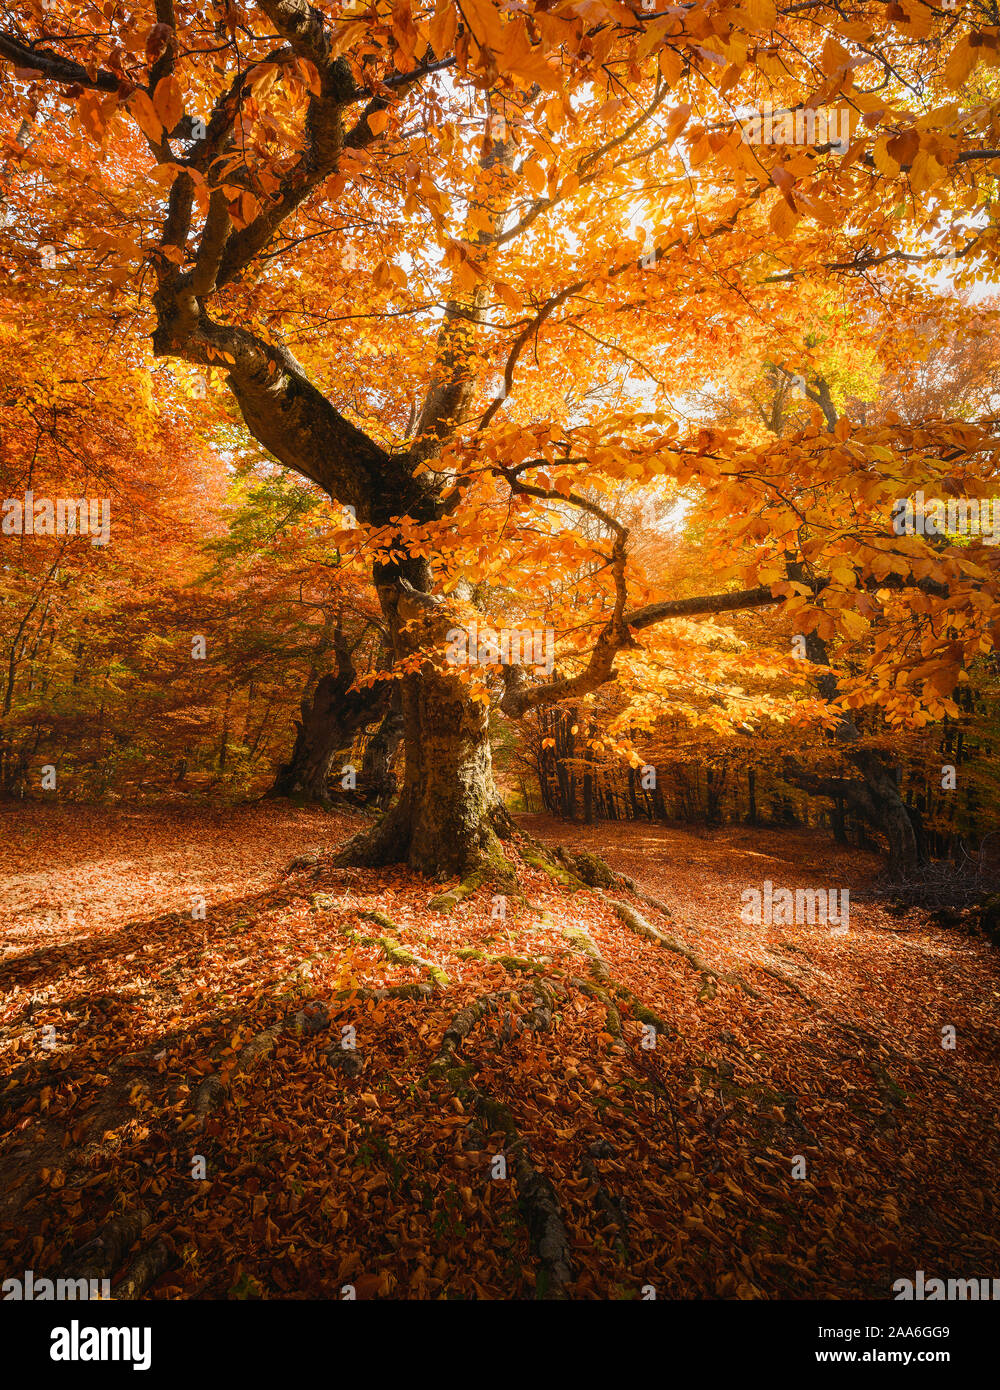 Beech tree in a forest. Autumn landscape. Beautiful fall scenery bacground for travel materials Stock Photo